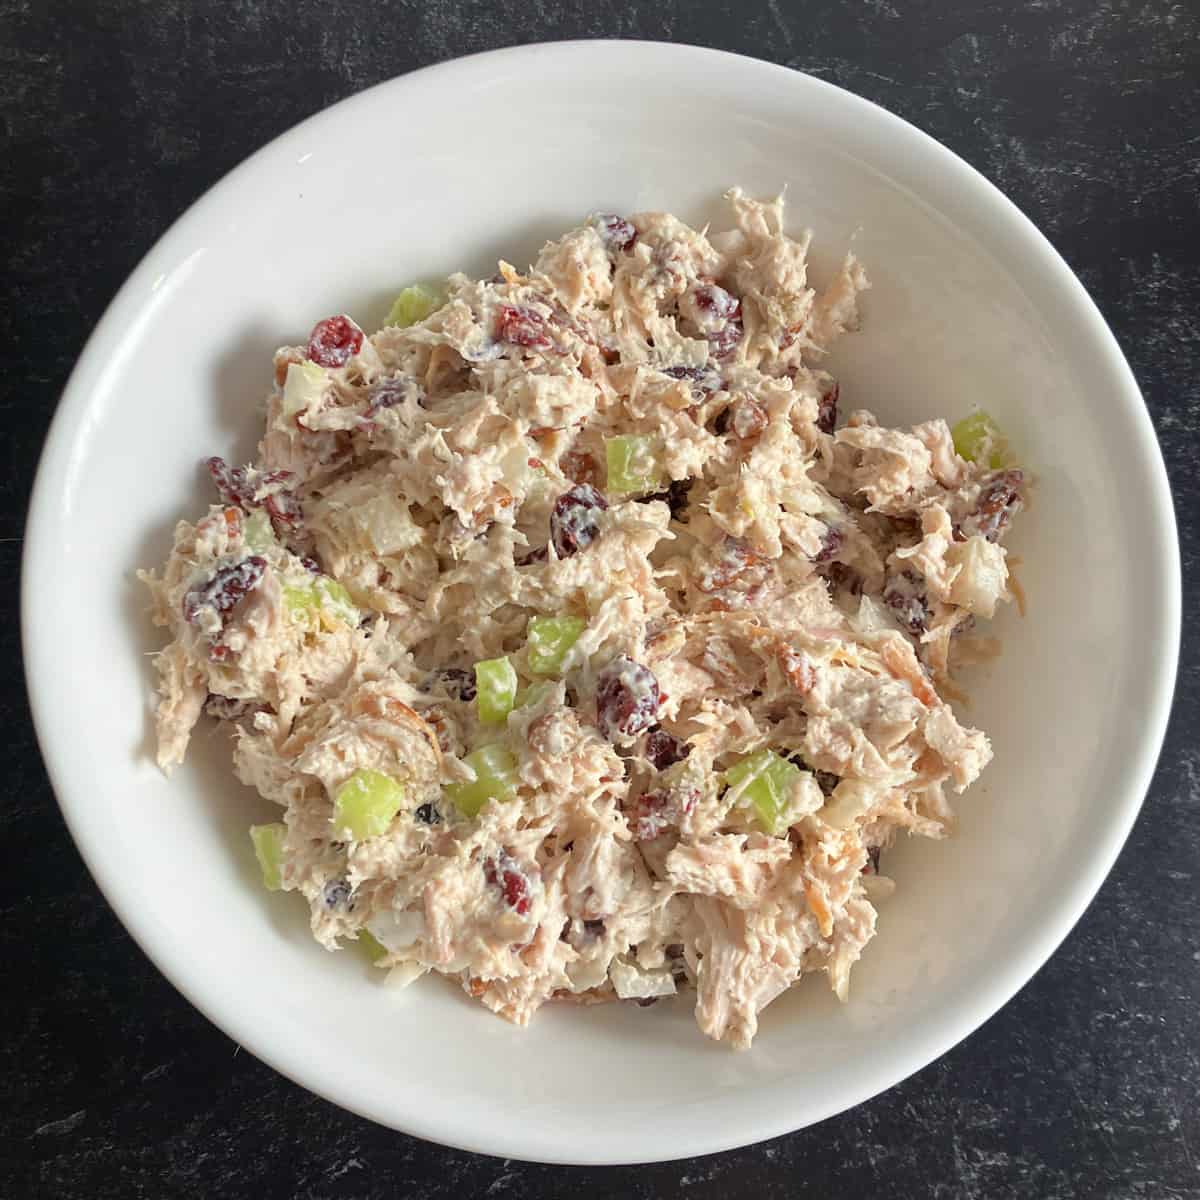 how to make turkey salad without mayo